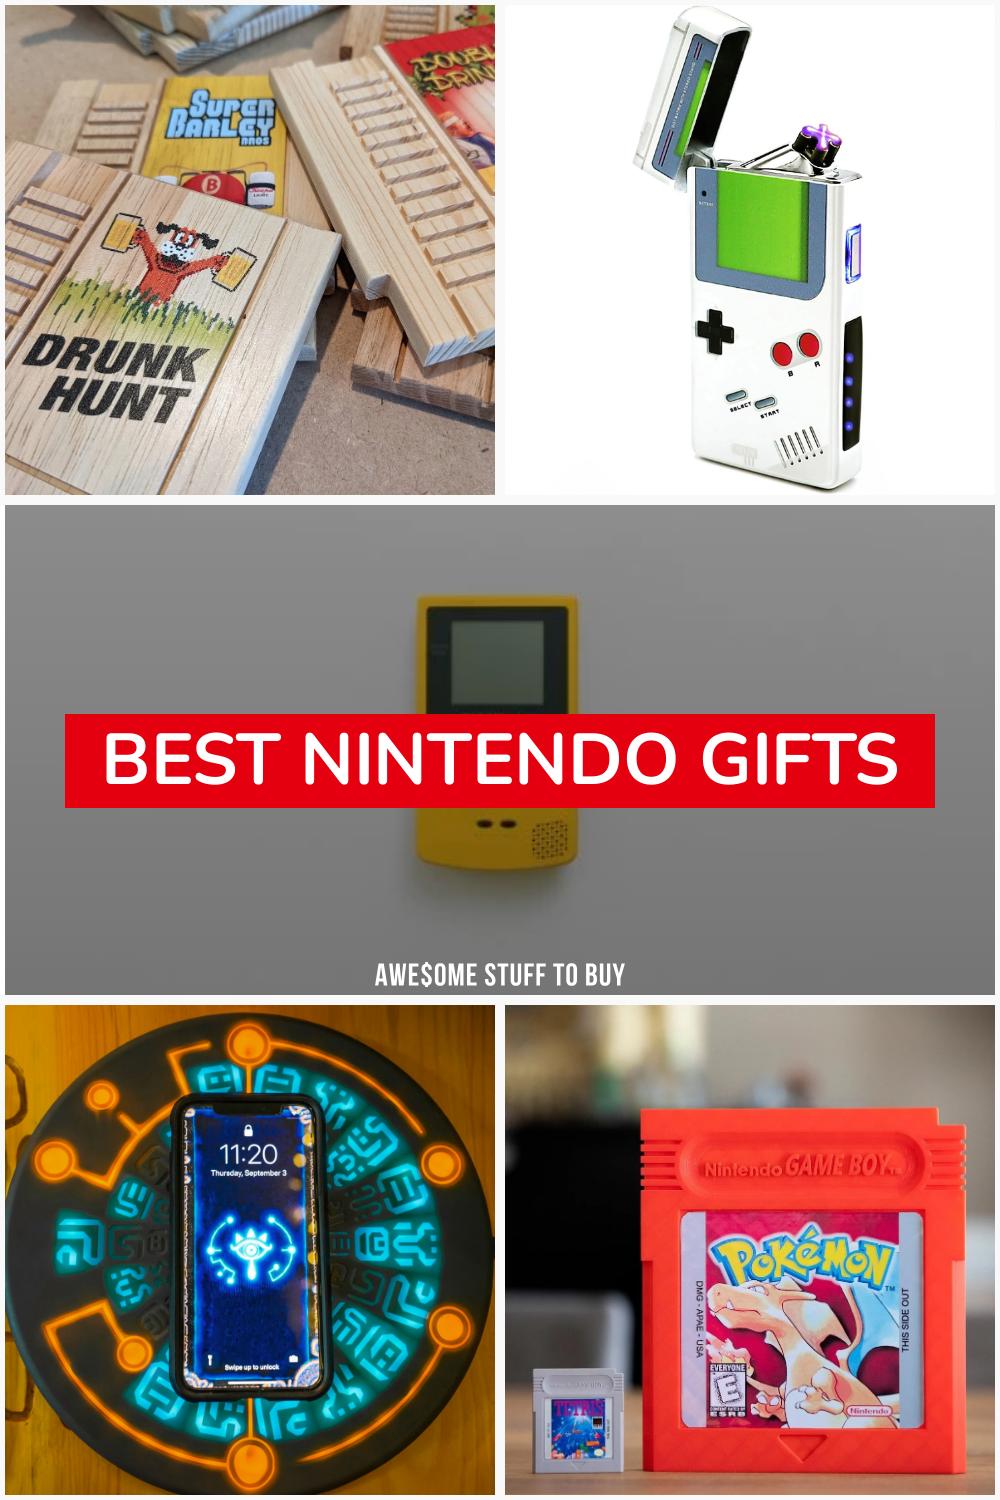 Nintendo Gifts // Awesome Stuff to Buy